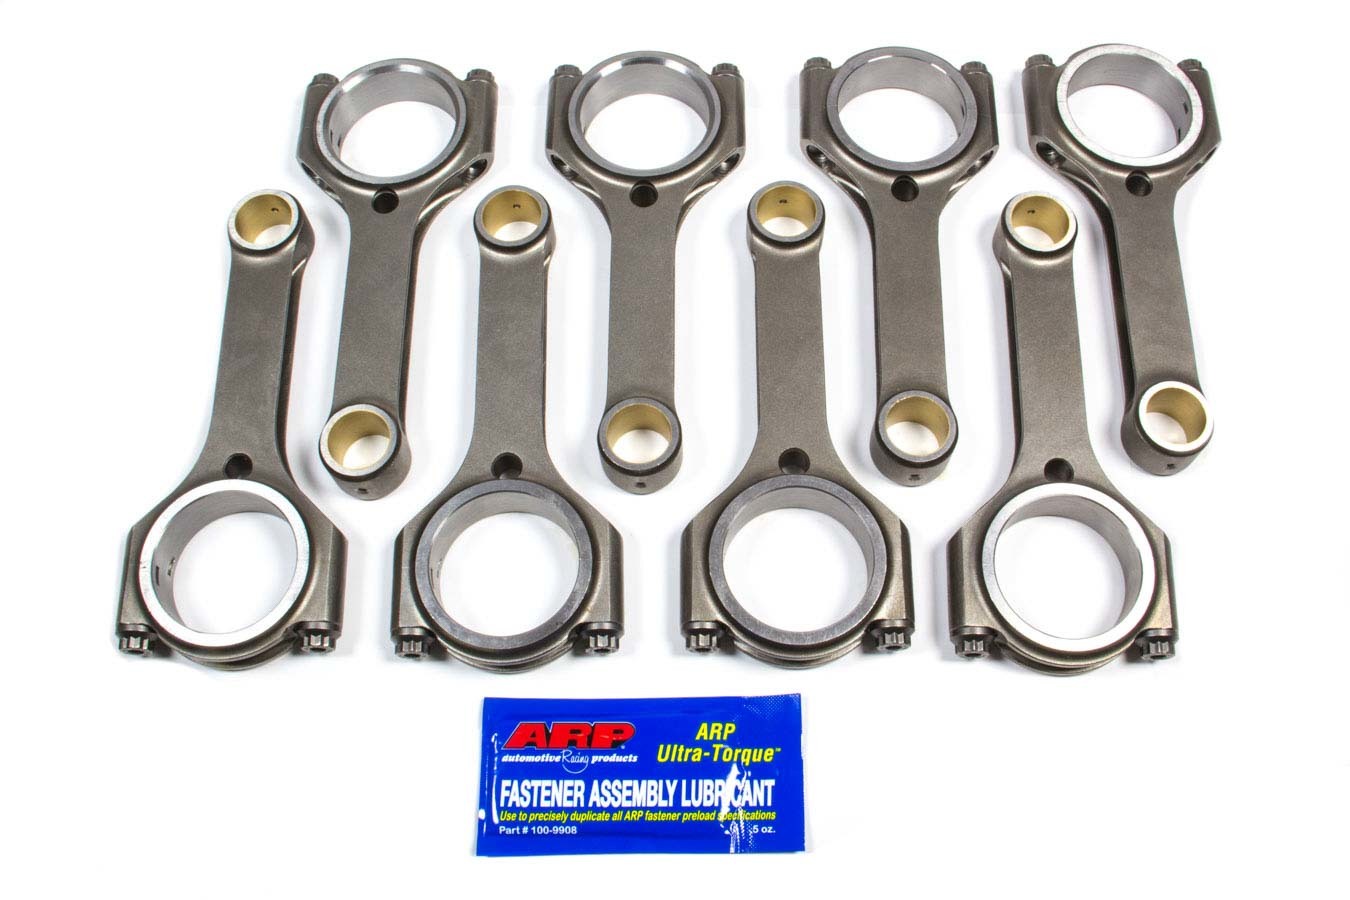 Scat 2-350-6000-2000-QLS - Connecting Rod, Ultra Q-Lite, H Beam, 6.000 in Long, Bushed, 7/16 in Cap Screws, ARP8740, Forged Steel, Small Block Chevy, Set of 8